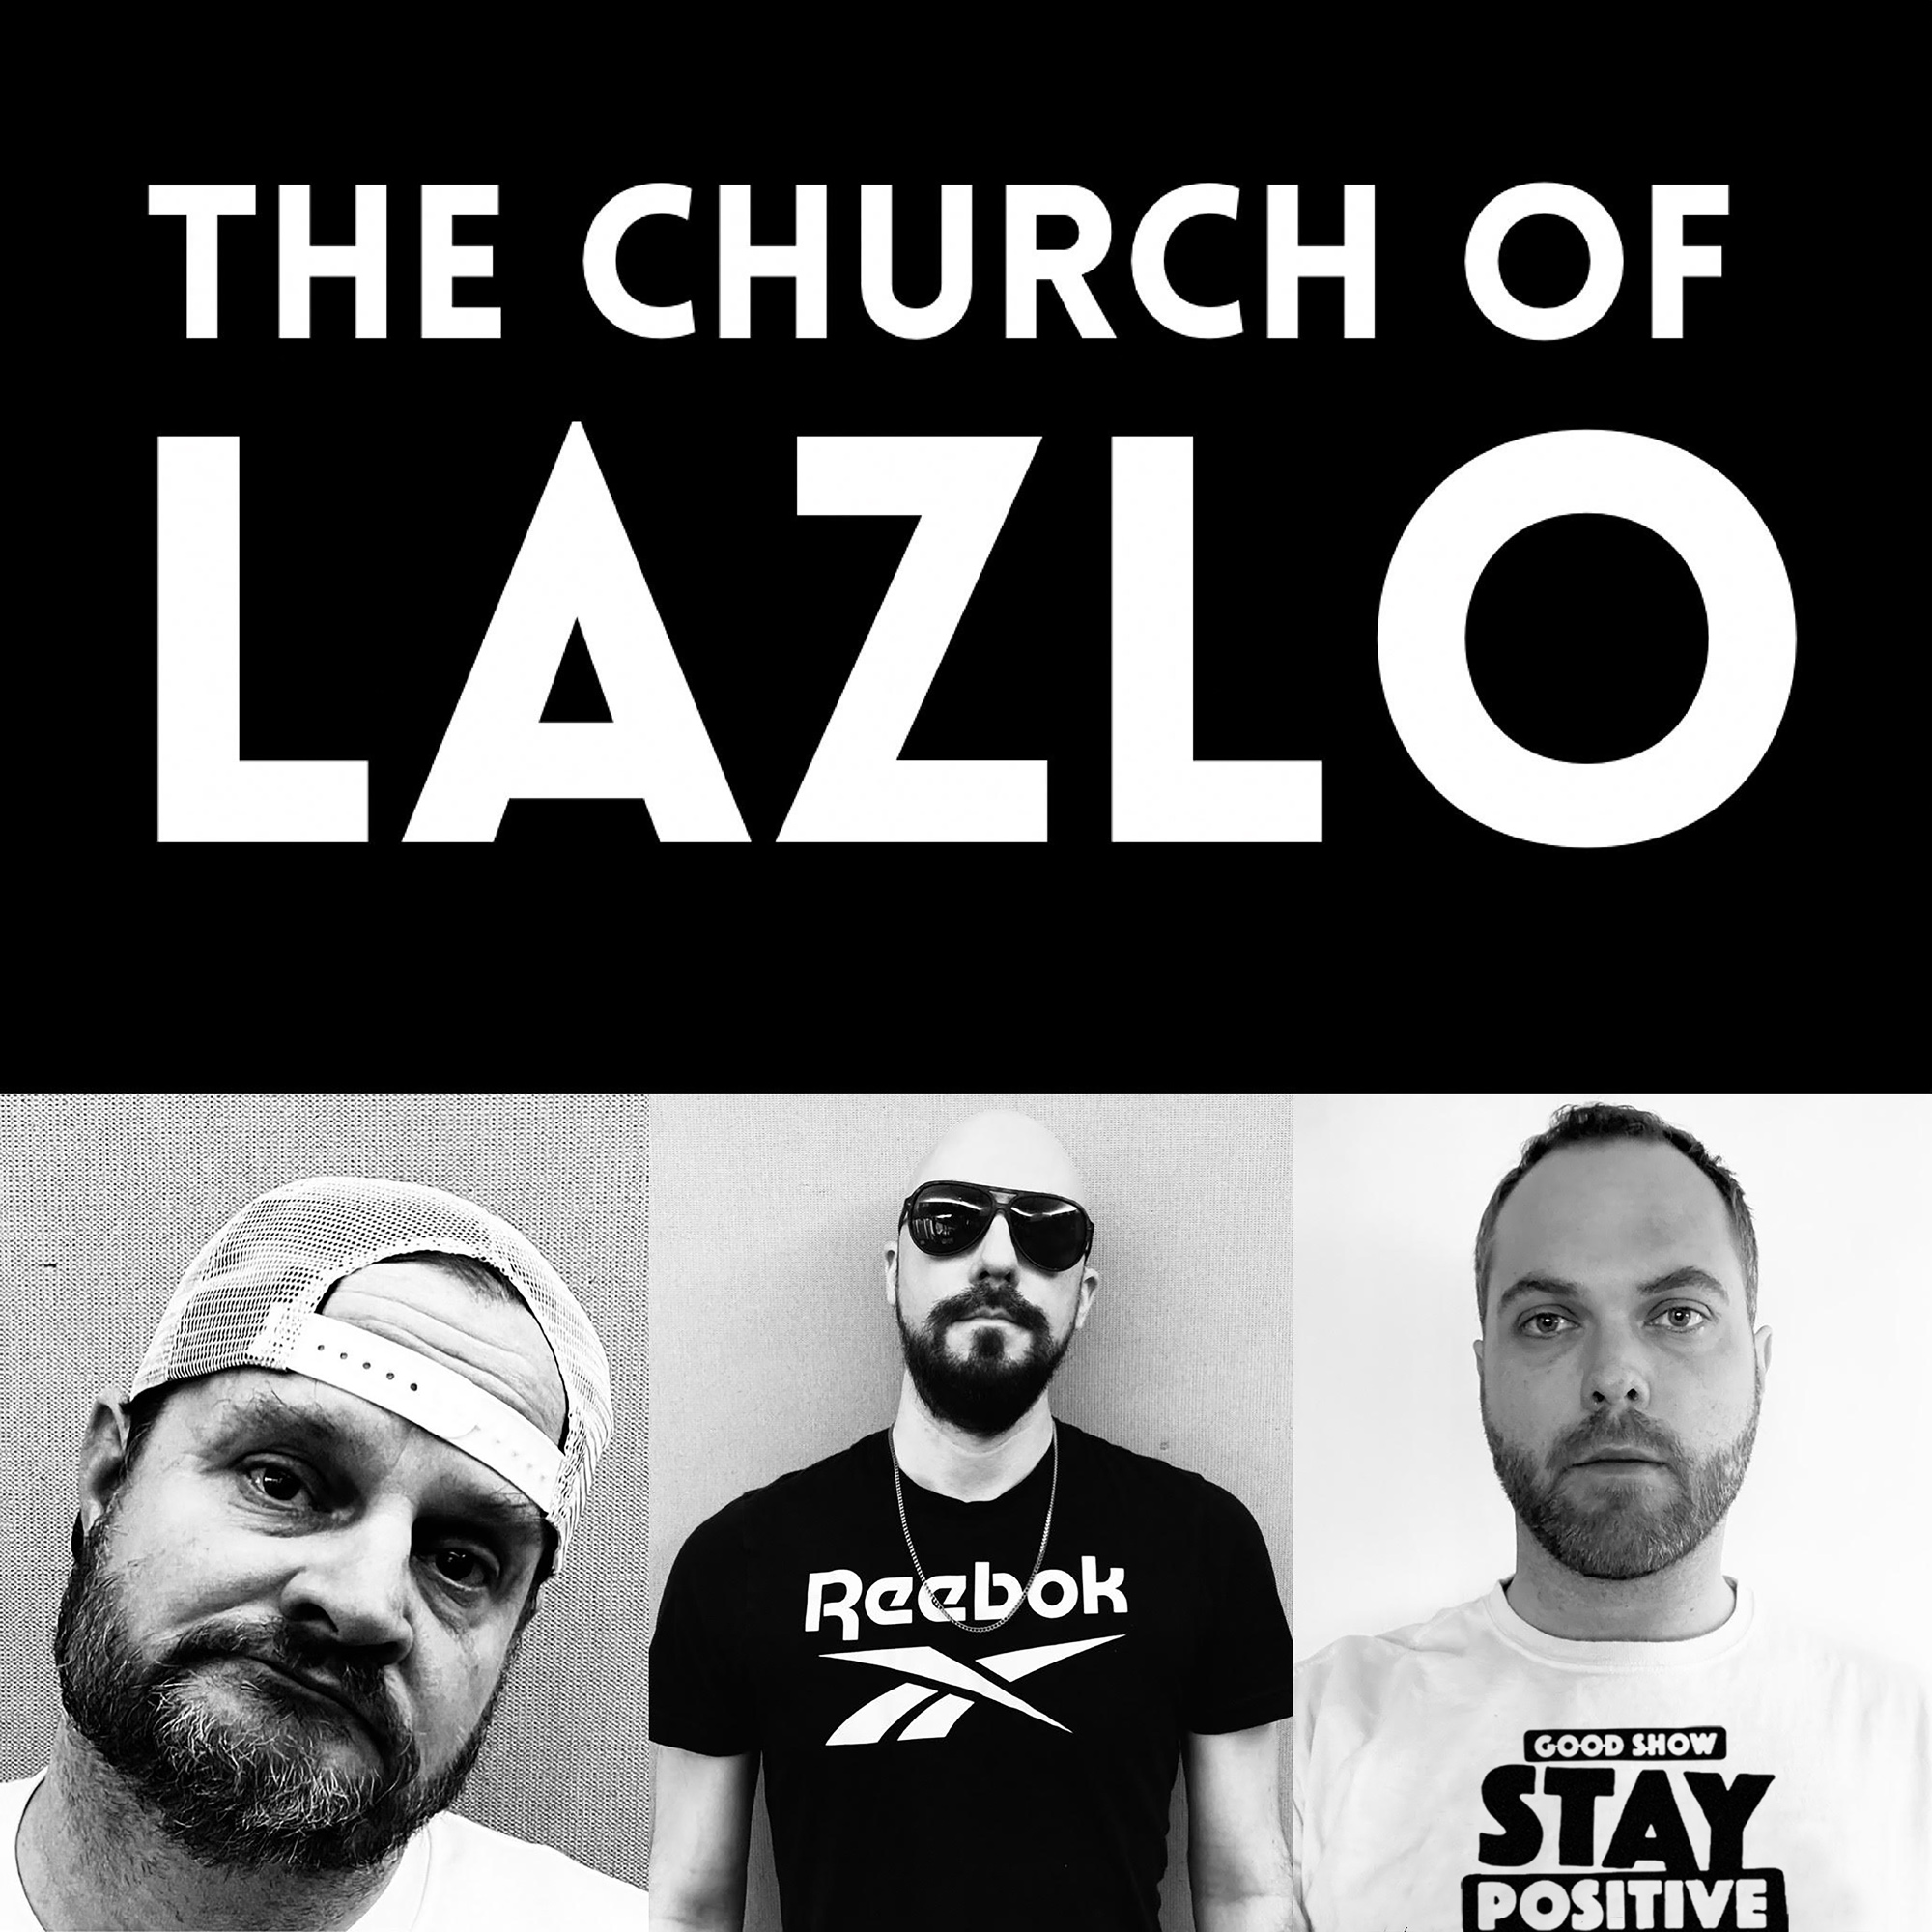 The Church of Lazlo: Toxic & Problematic